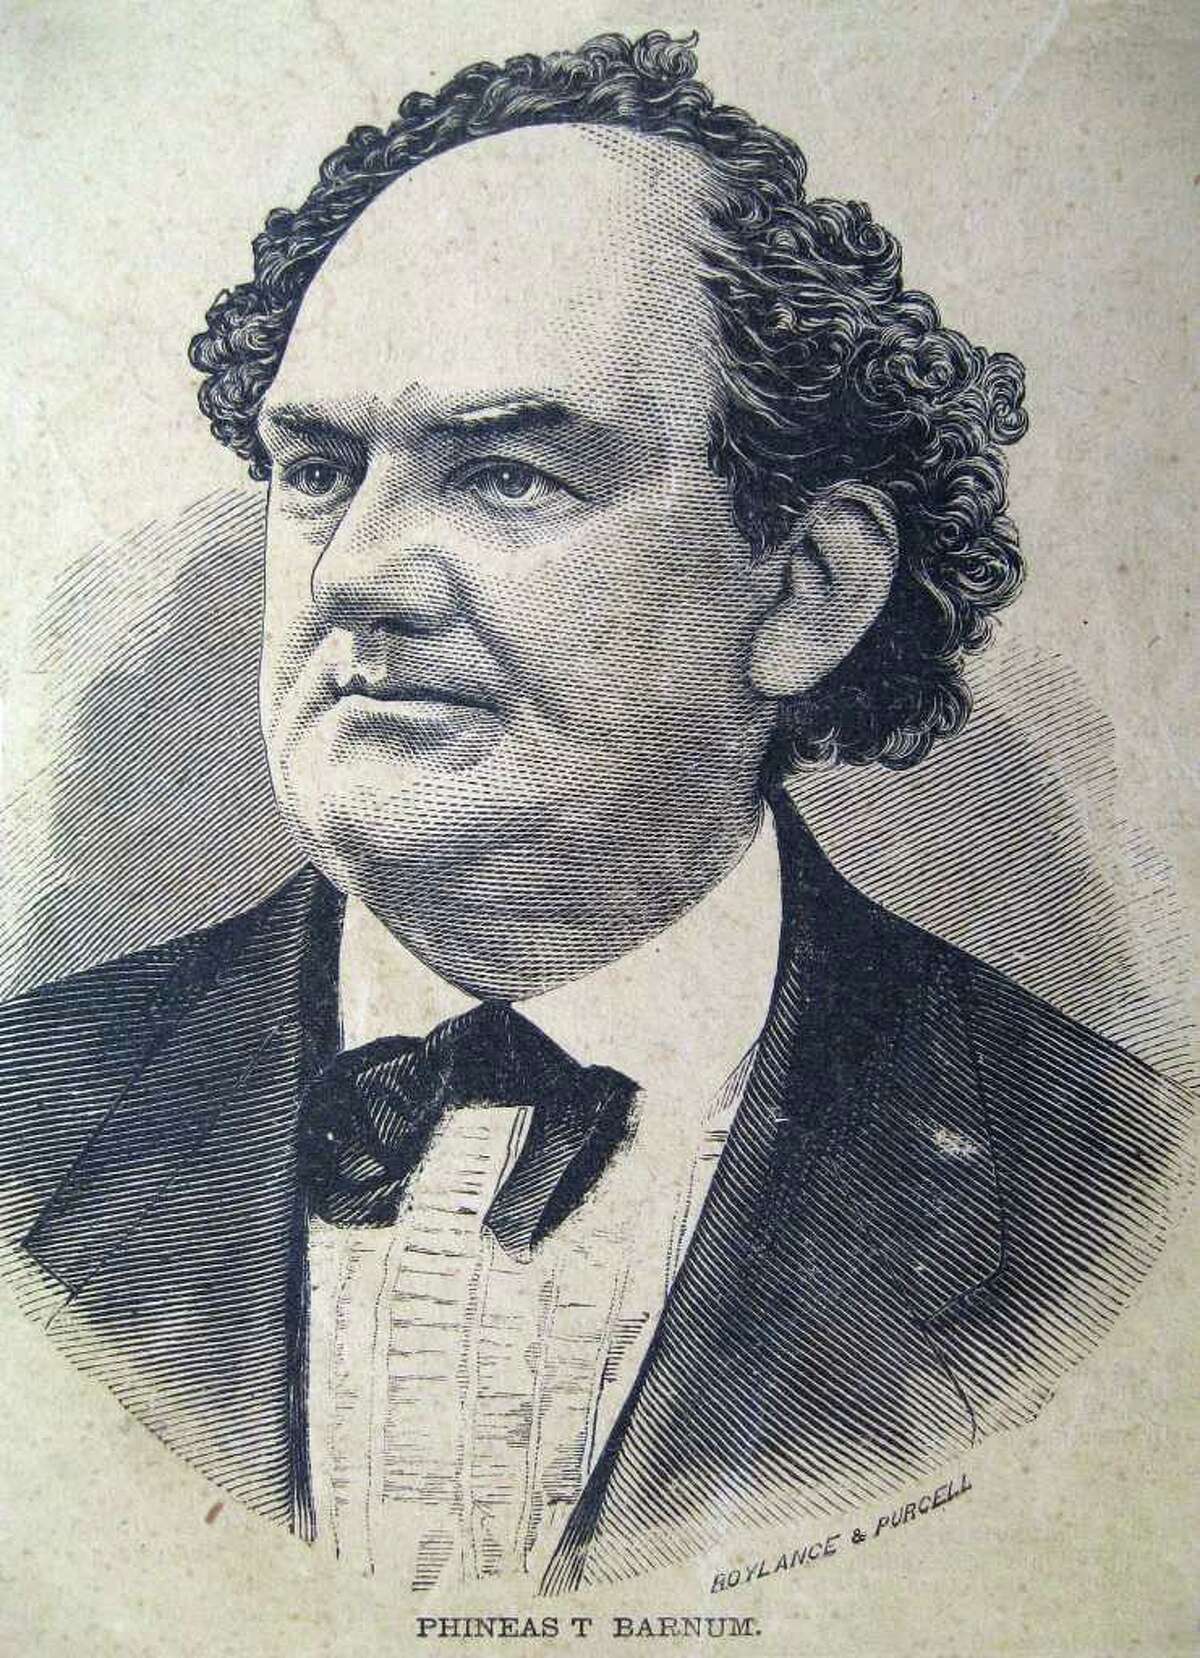 Phineas Taylor Barnum, 1810-1891, was born in Bethel but lived for most of his life in Bridgeport. He was also mayor of the city and was a key figure in establishing a number of city institutions, such as Bridgeport Hospital, the Bridgeport Hydraulic Co. and its public library. He is buried in Mountain Grove Cemetery. (Courtesy of the Bridgeport History Center at the Bridgeport Public Library)